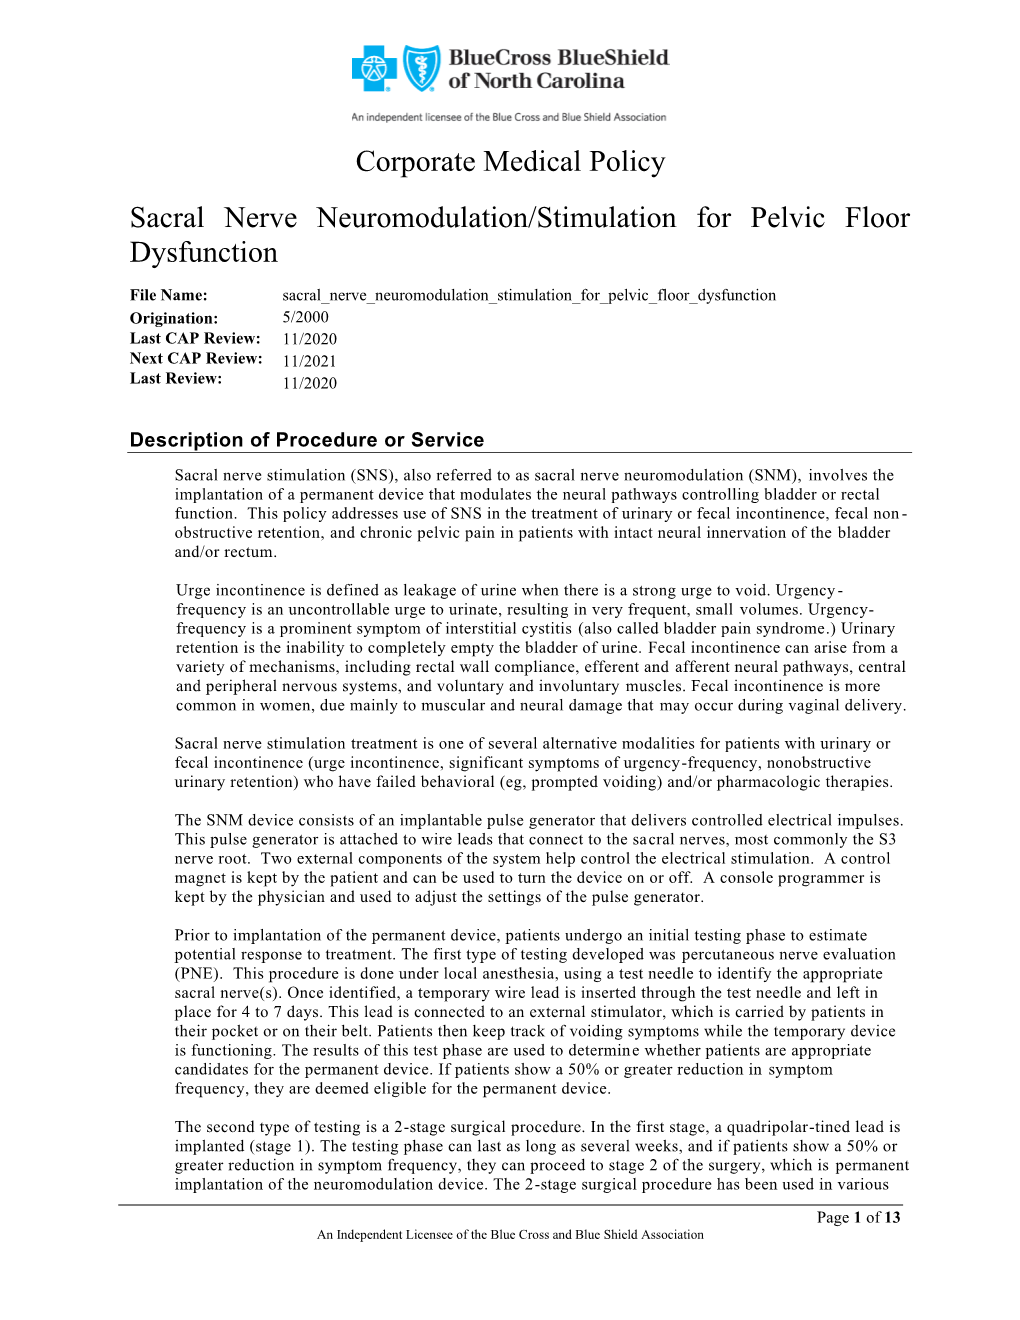 Corporate Medical Policy Sacral Nerve Neuromodulation/Stimulation for Pelvic Floor Dysfunction